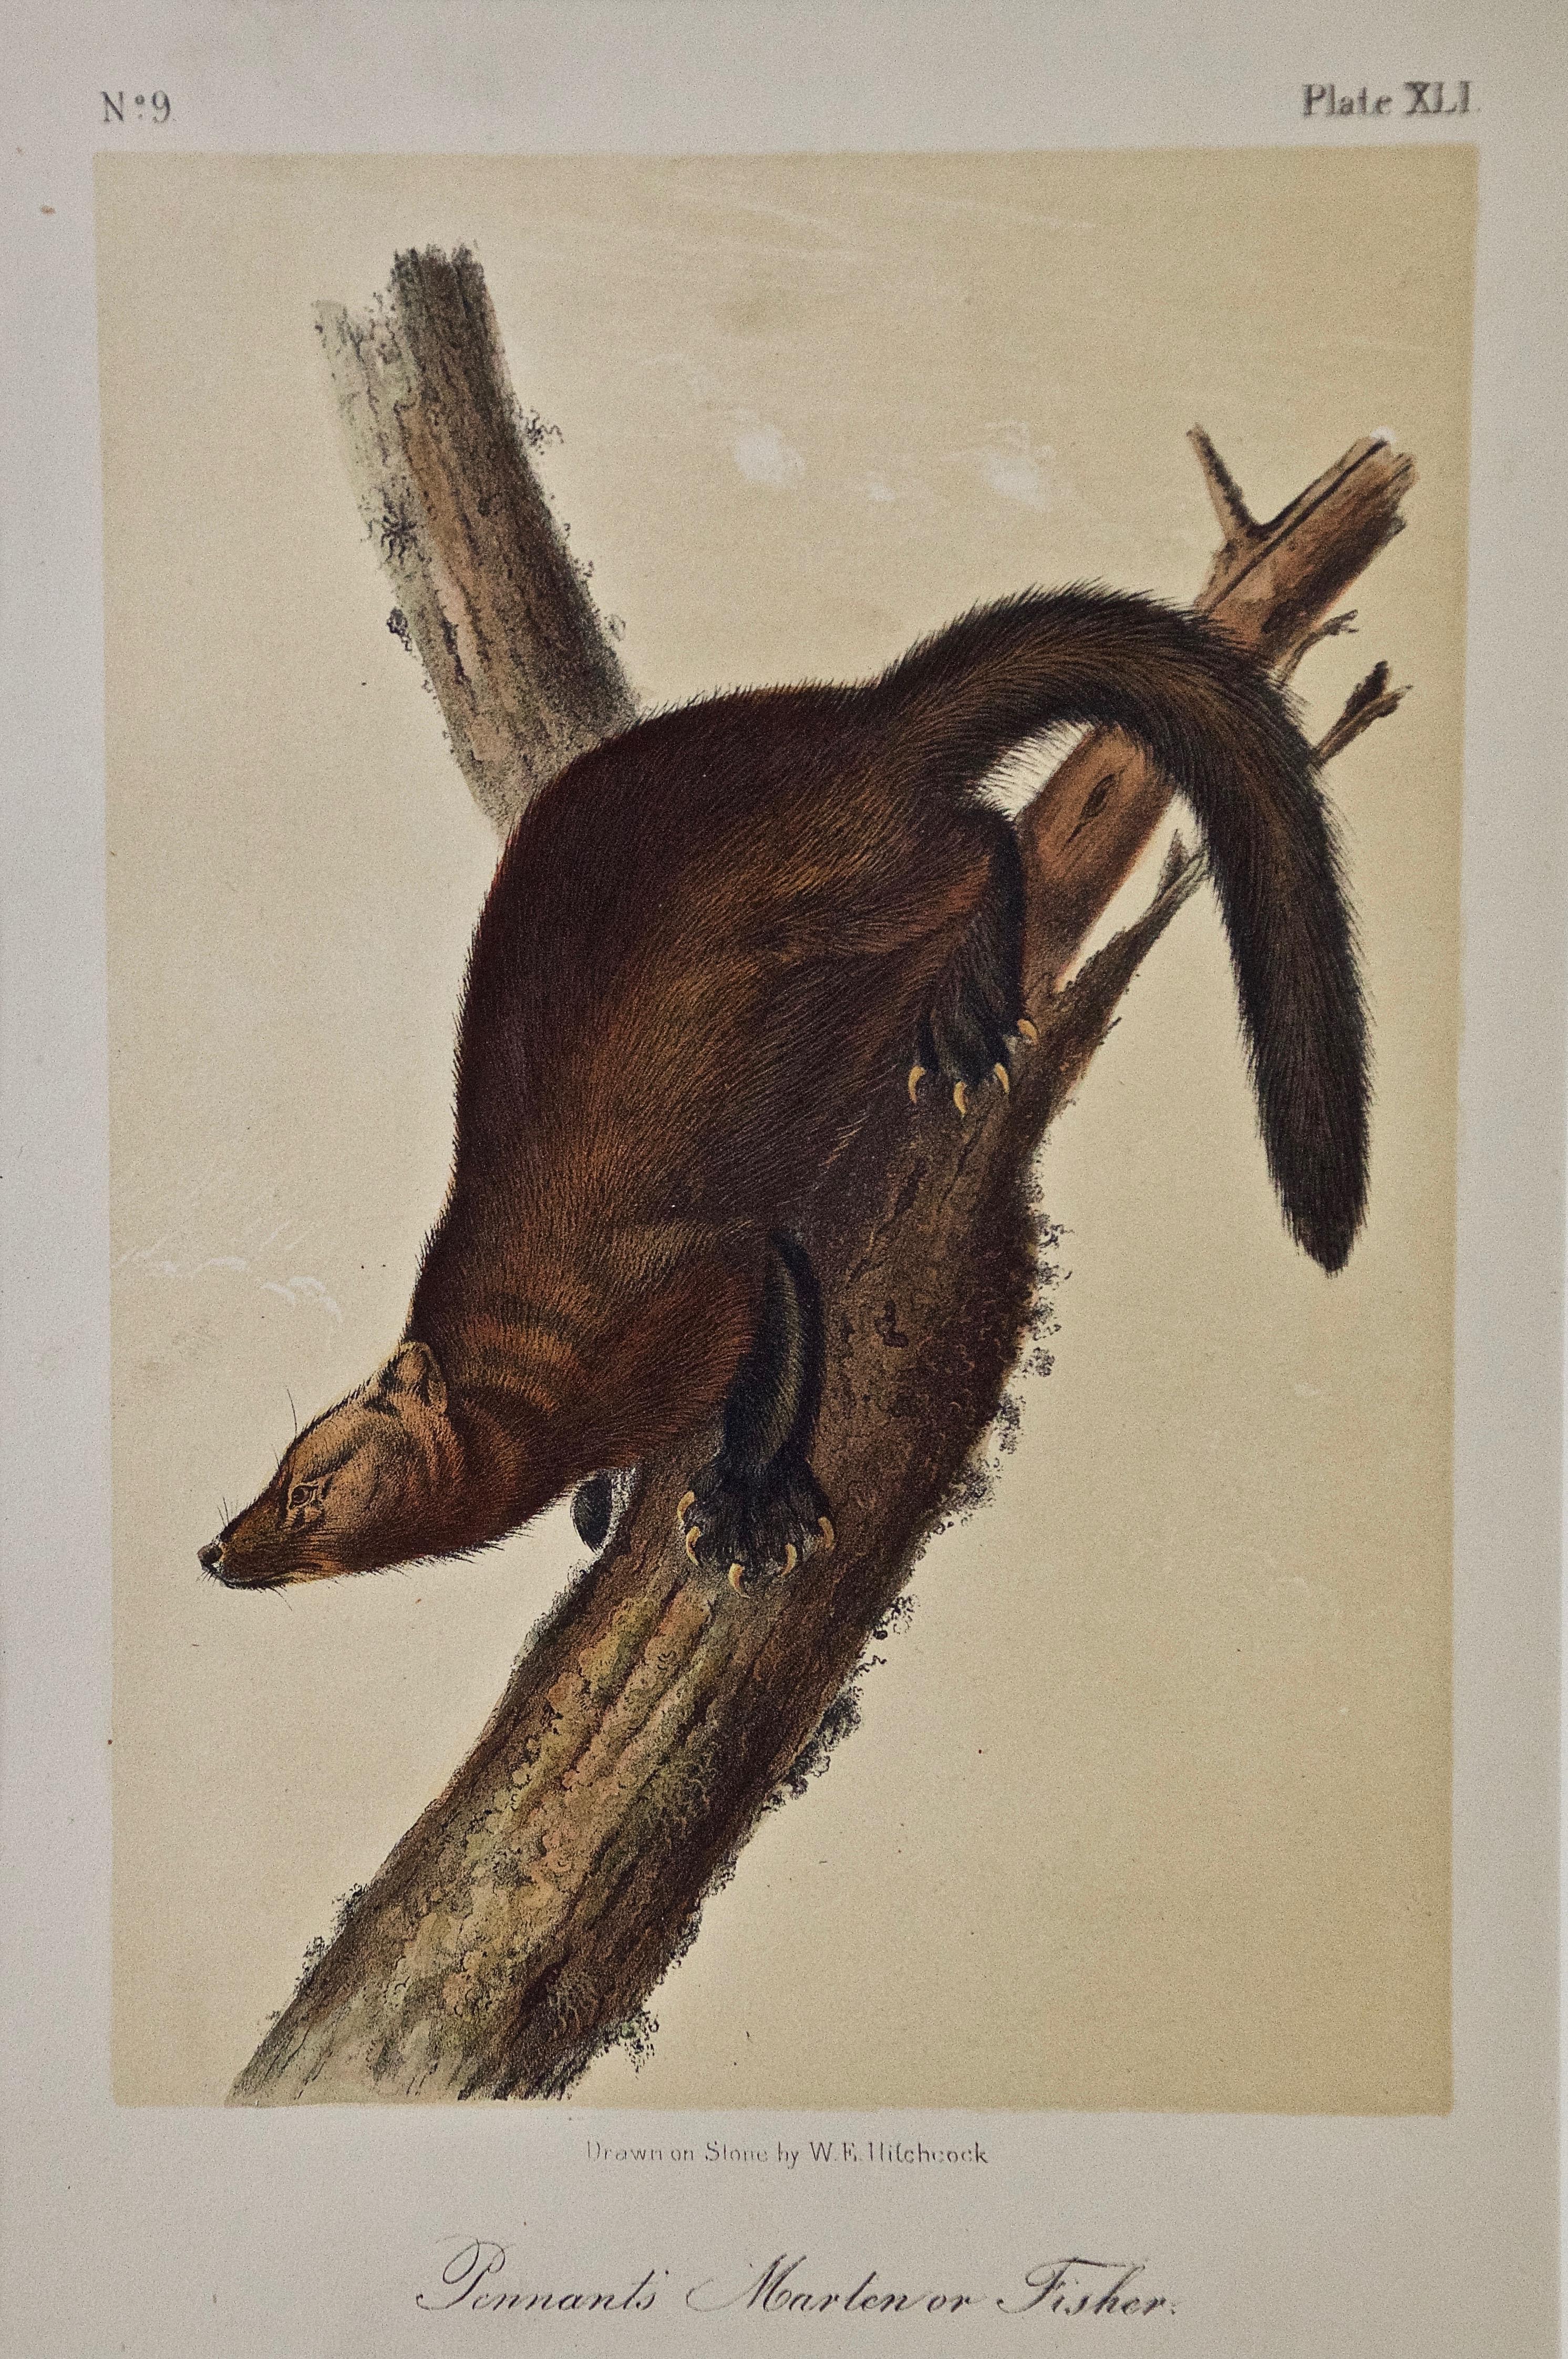 Original Audubon Hand Colored Lithograph of a "Pennant's Marten or Fisher"